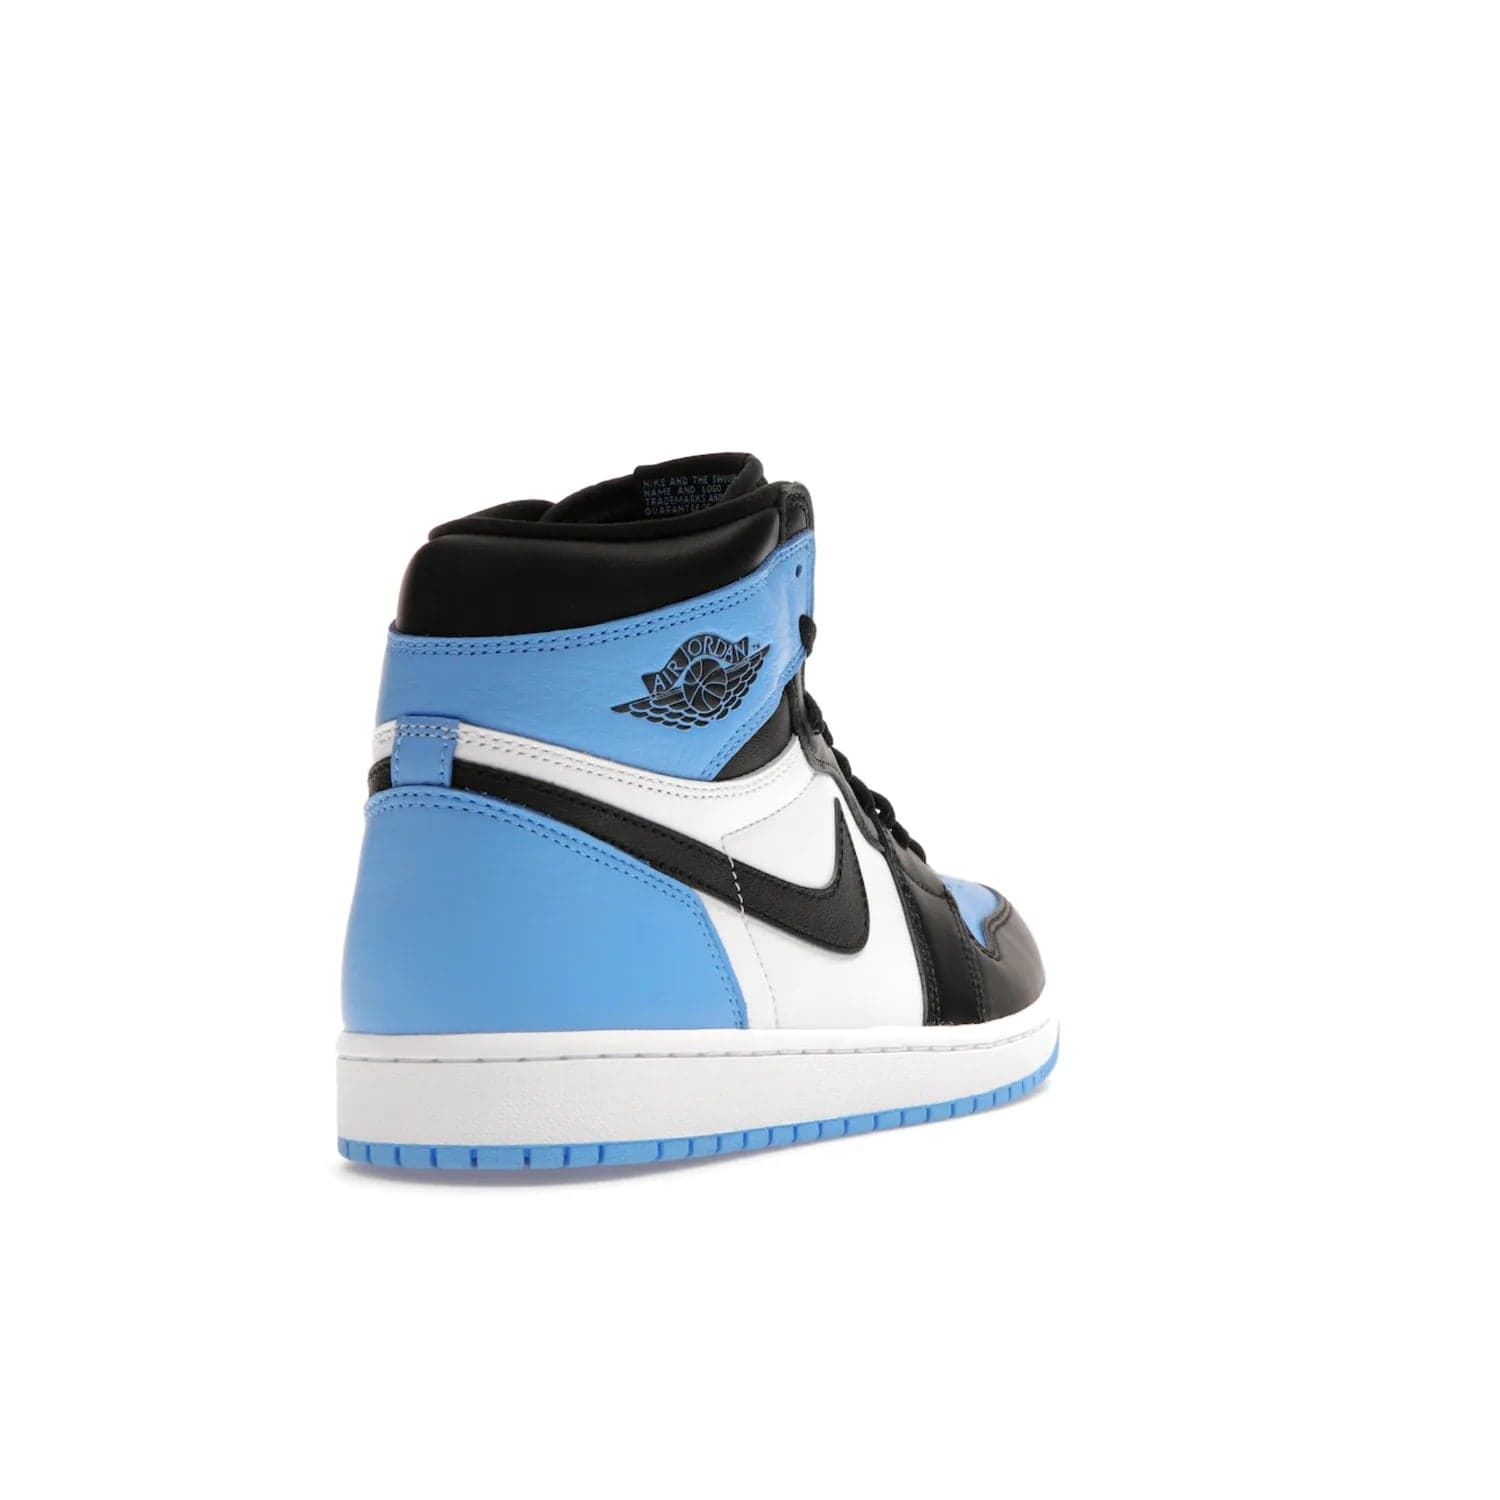 Jordan 1 Retro High OG UNC Toe - Image 31 - Only at www.BallersClubKickz.com - Jordan 1 High OG UNC Toe is a fashionable, high-quality sneaker featuring University Blue, Black White and White. Releasing July 22, 2023, it's the perfect pick up for sneakerheads.